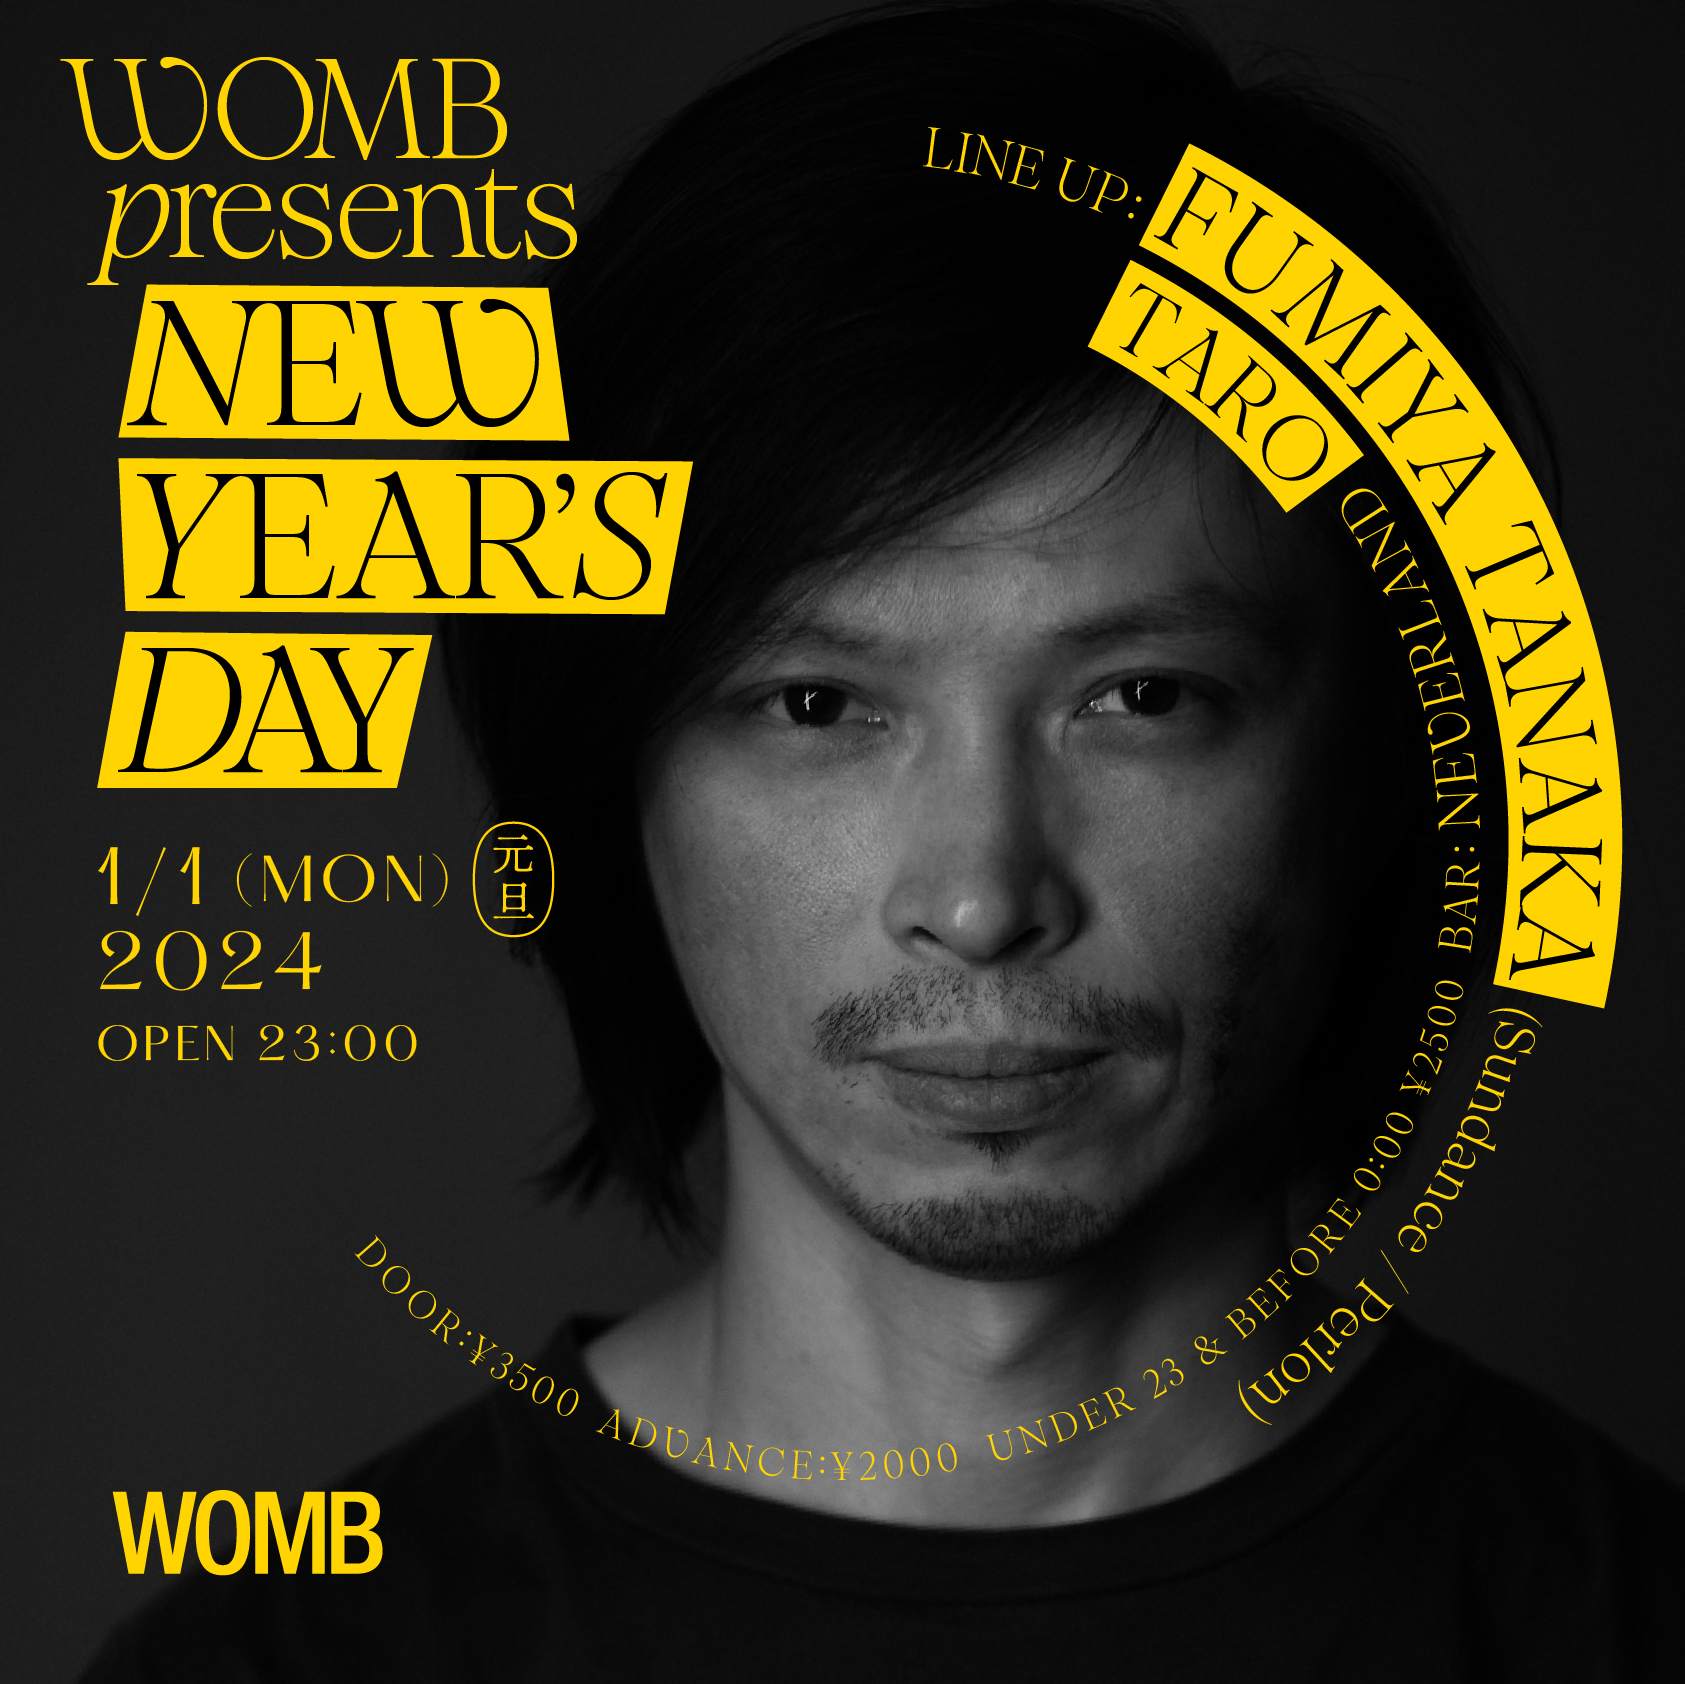 WOMB PRESENTS NEW YEAR'S DAY - Página frontal